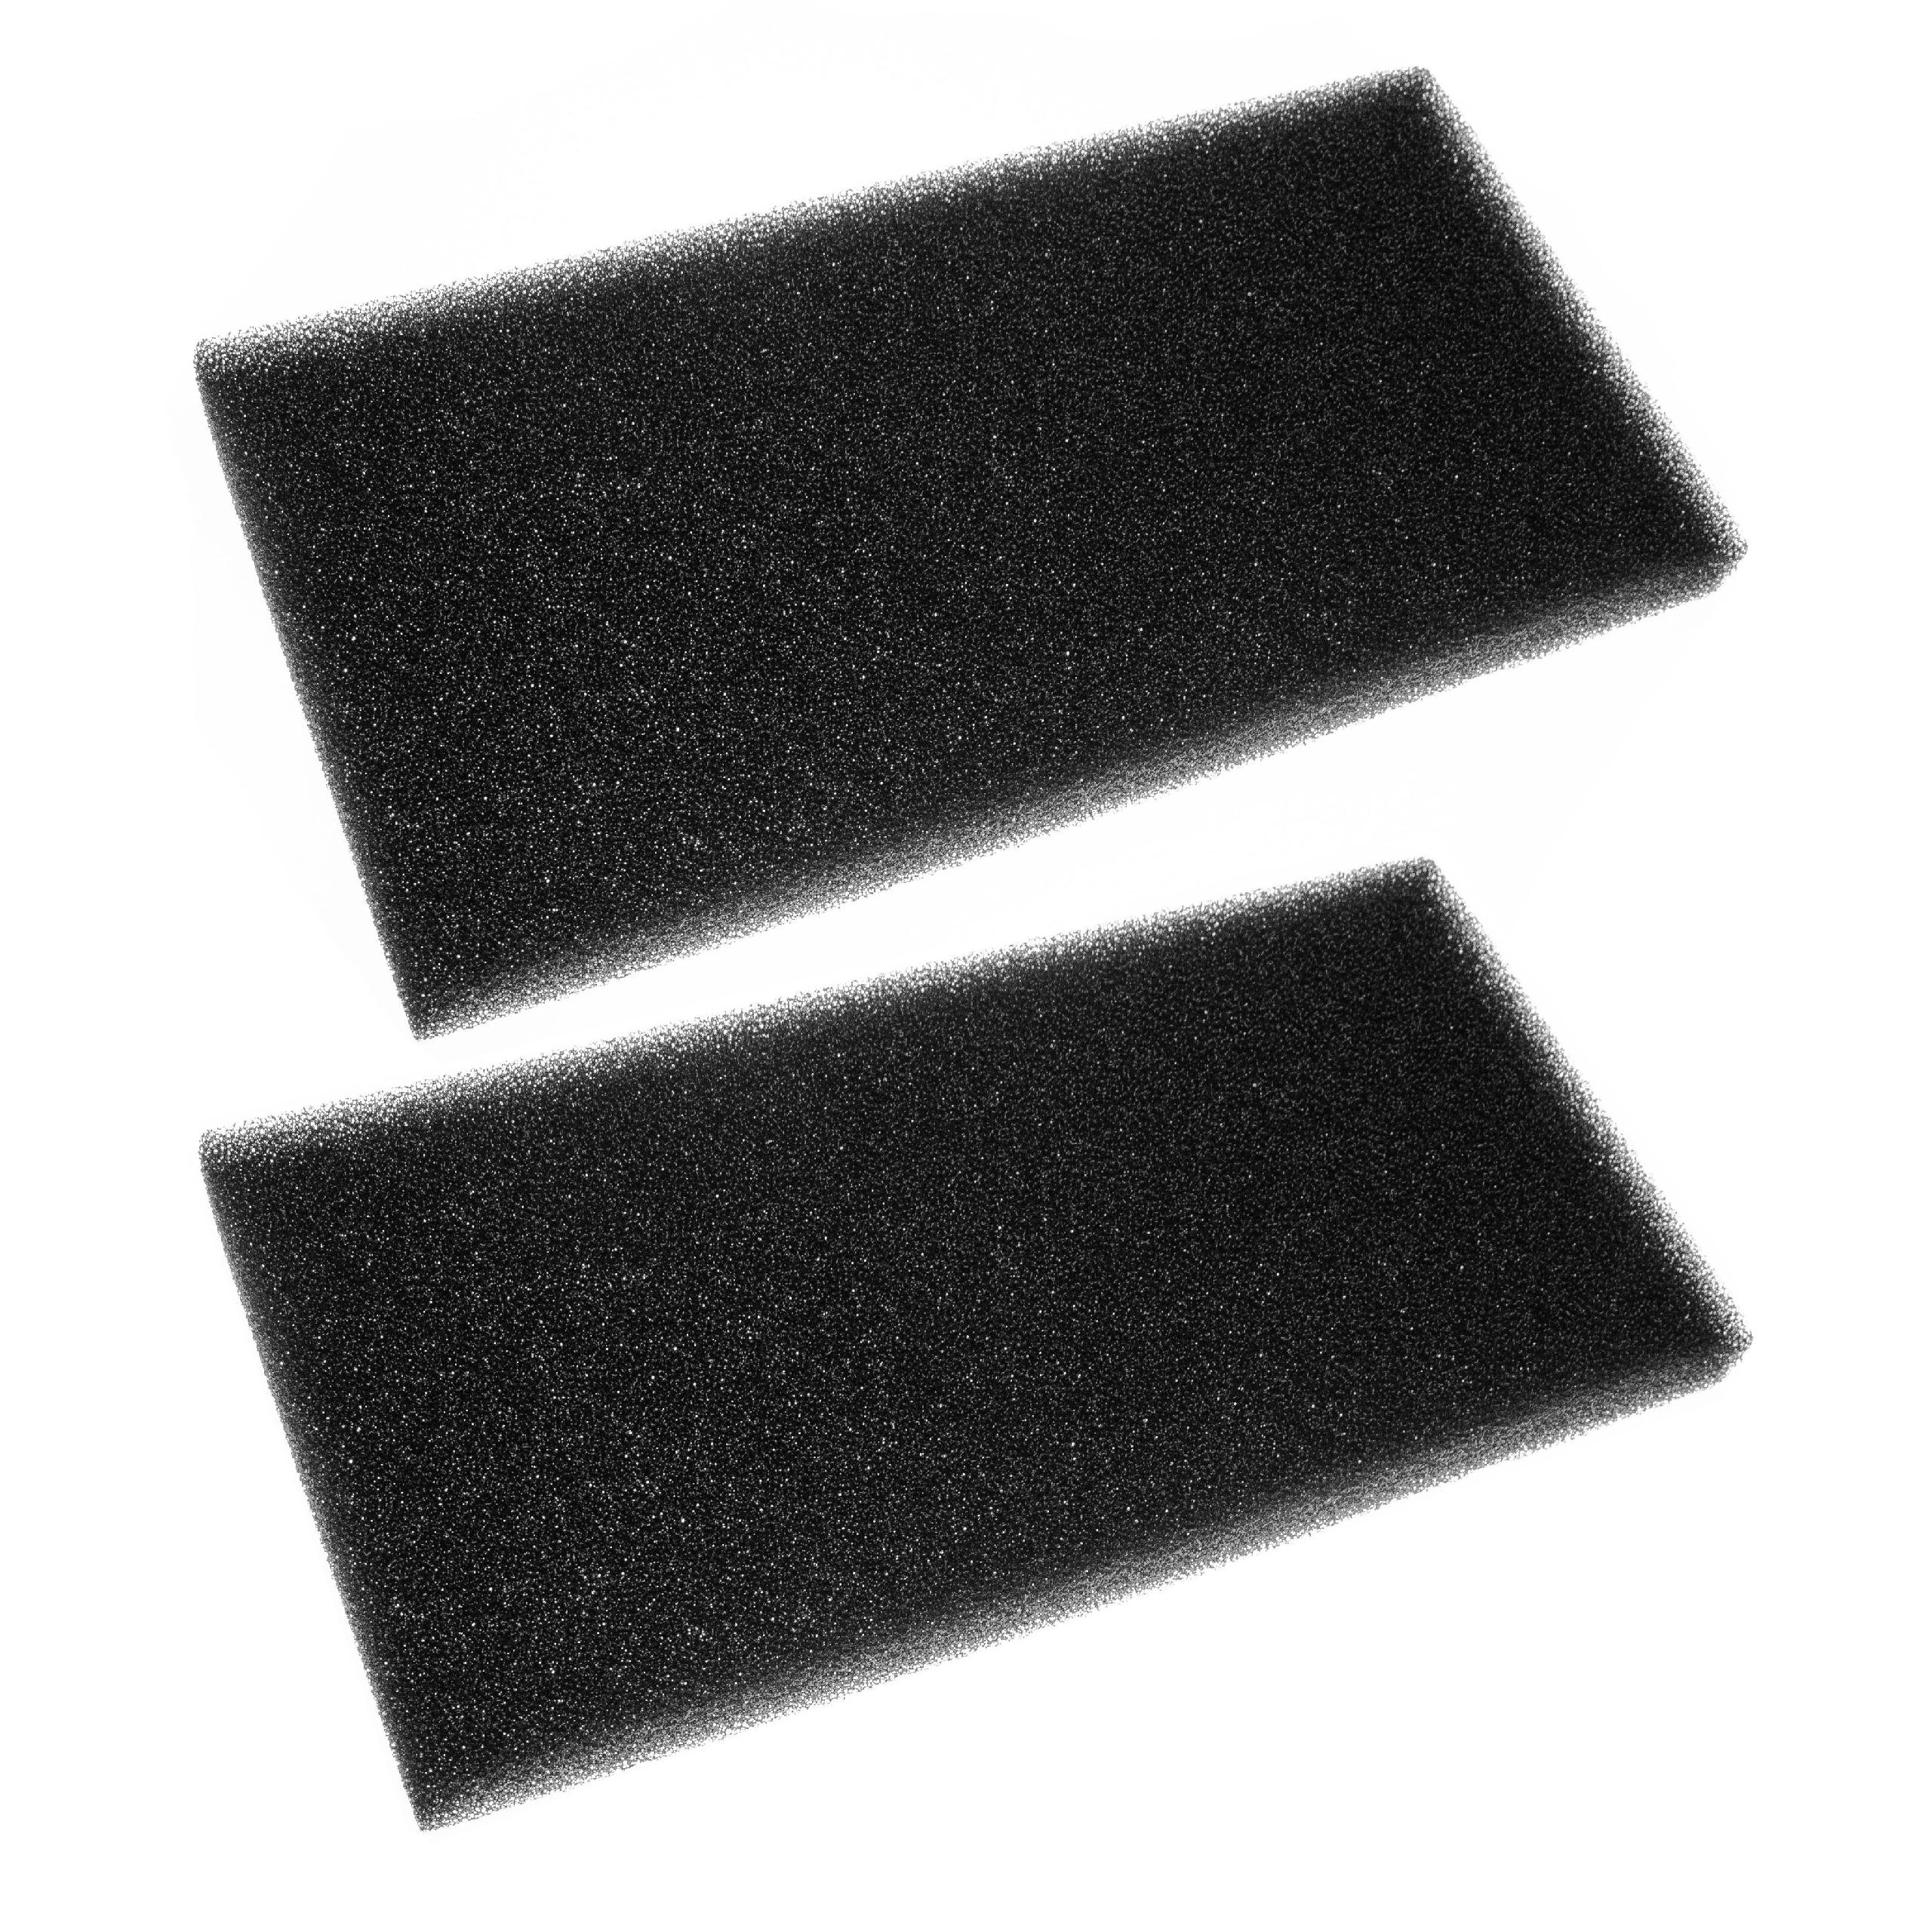 Filter Set (2x foam filter) as Replacement for Gorenje/Panasonic ANH-628504, ANH-810183 Tumble Dryer etc.